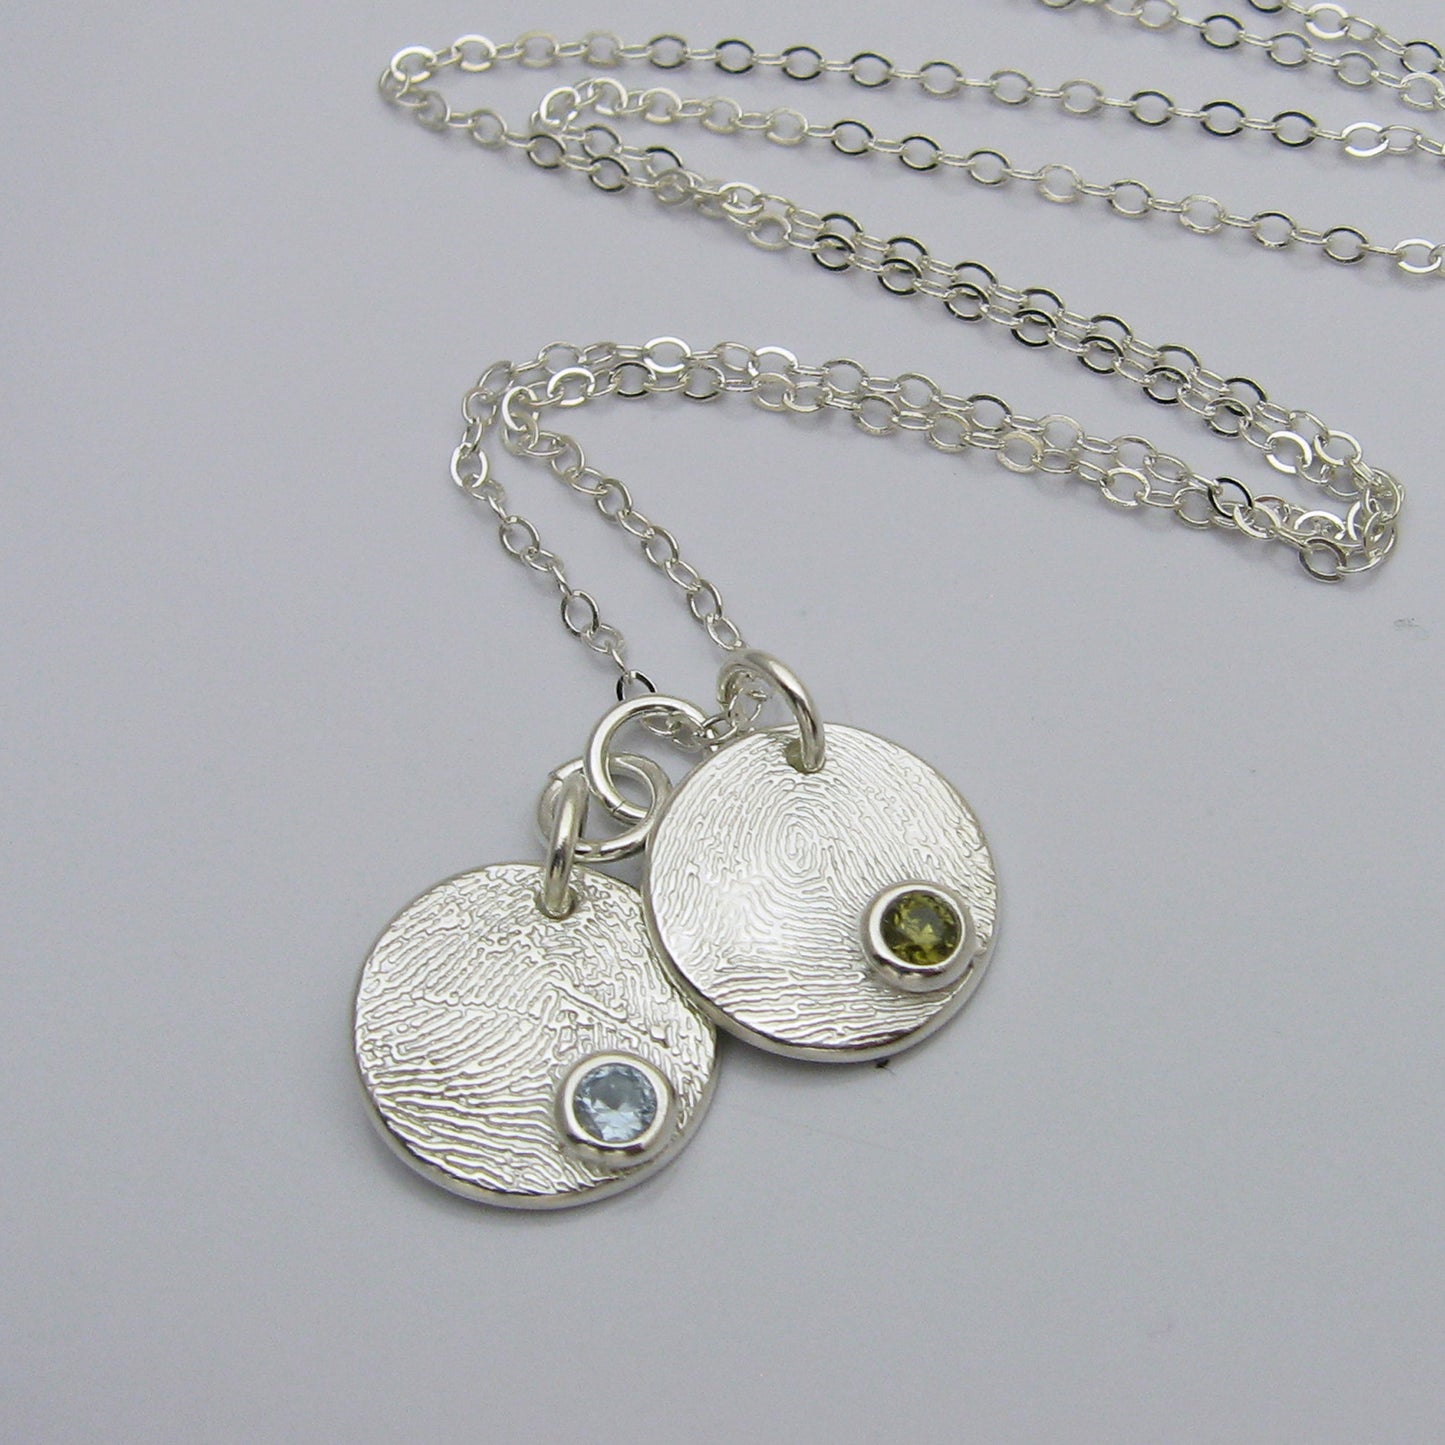 Circle Fingerprint with Birthstone Charm Necklace with 2 charms